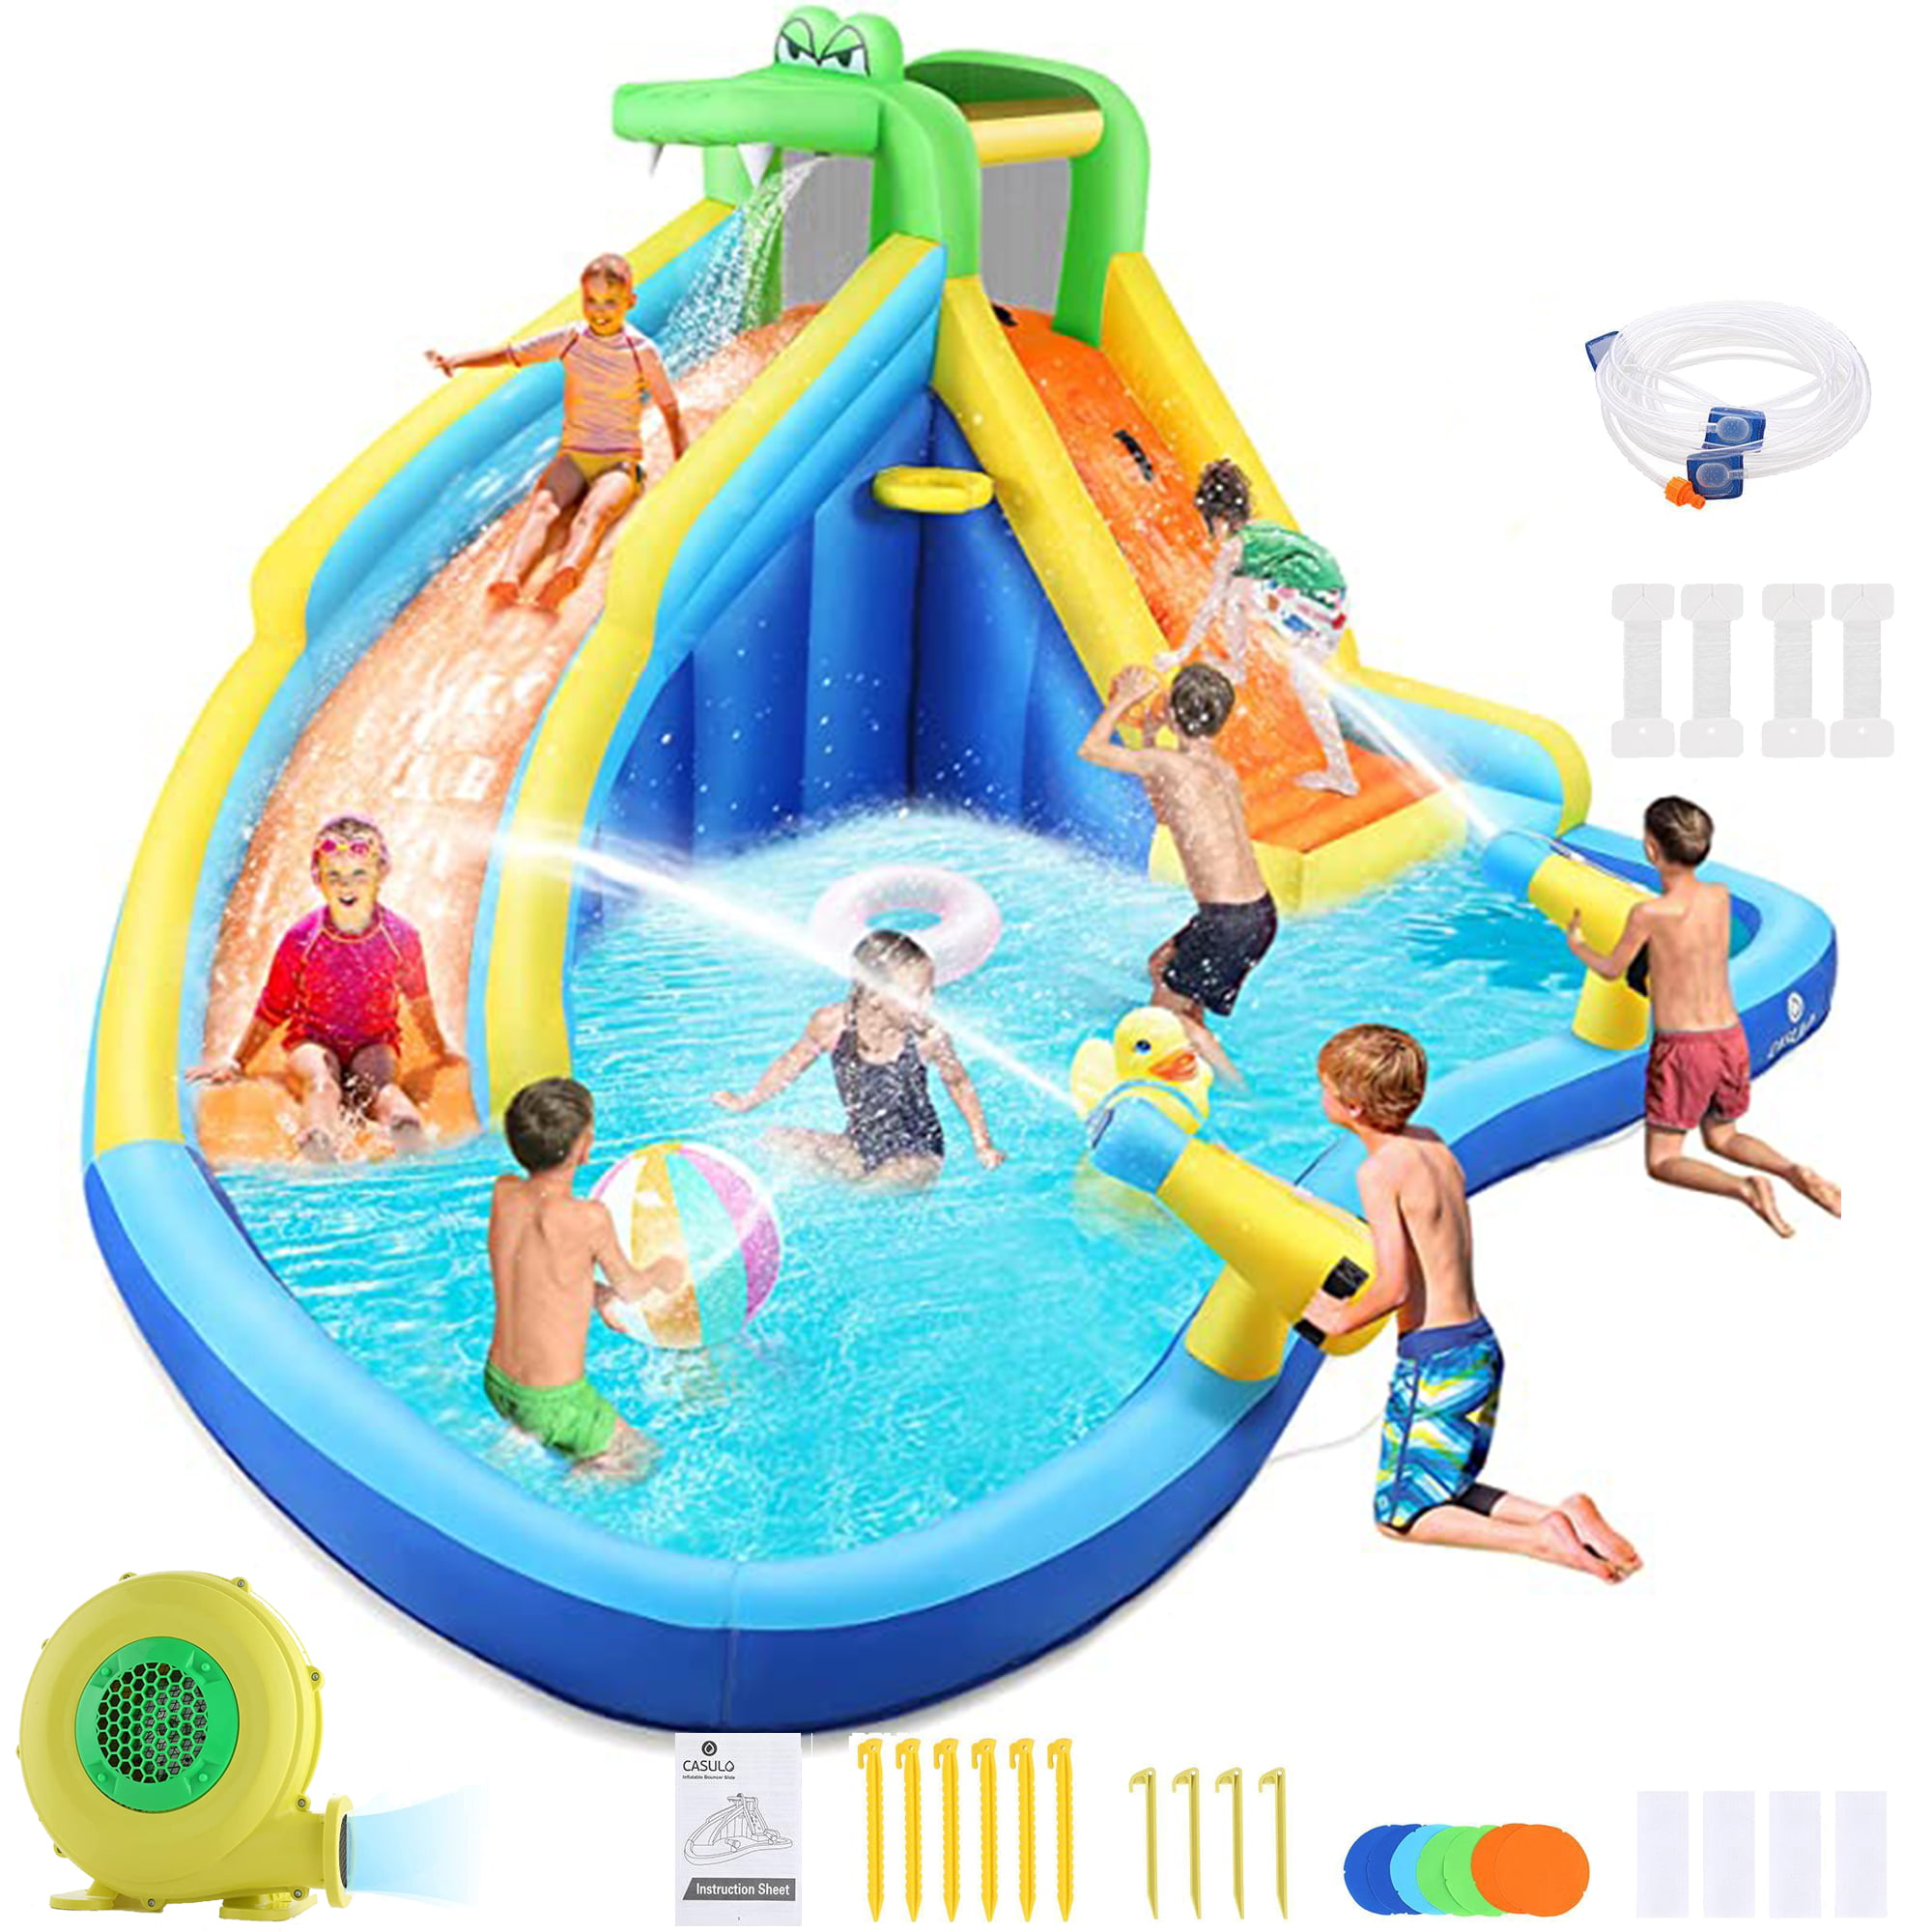 Step4Fun Crab Inflatable Bounce House,Inflatable Water Slide Park,Kids Long Water Slide with Splash Pool,Climbing Wall for Backyard Indoor and Outdoor Party,Included Air Pump,Repair Kit,Carrying Case 